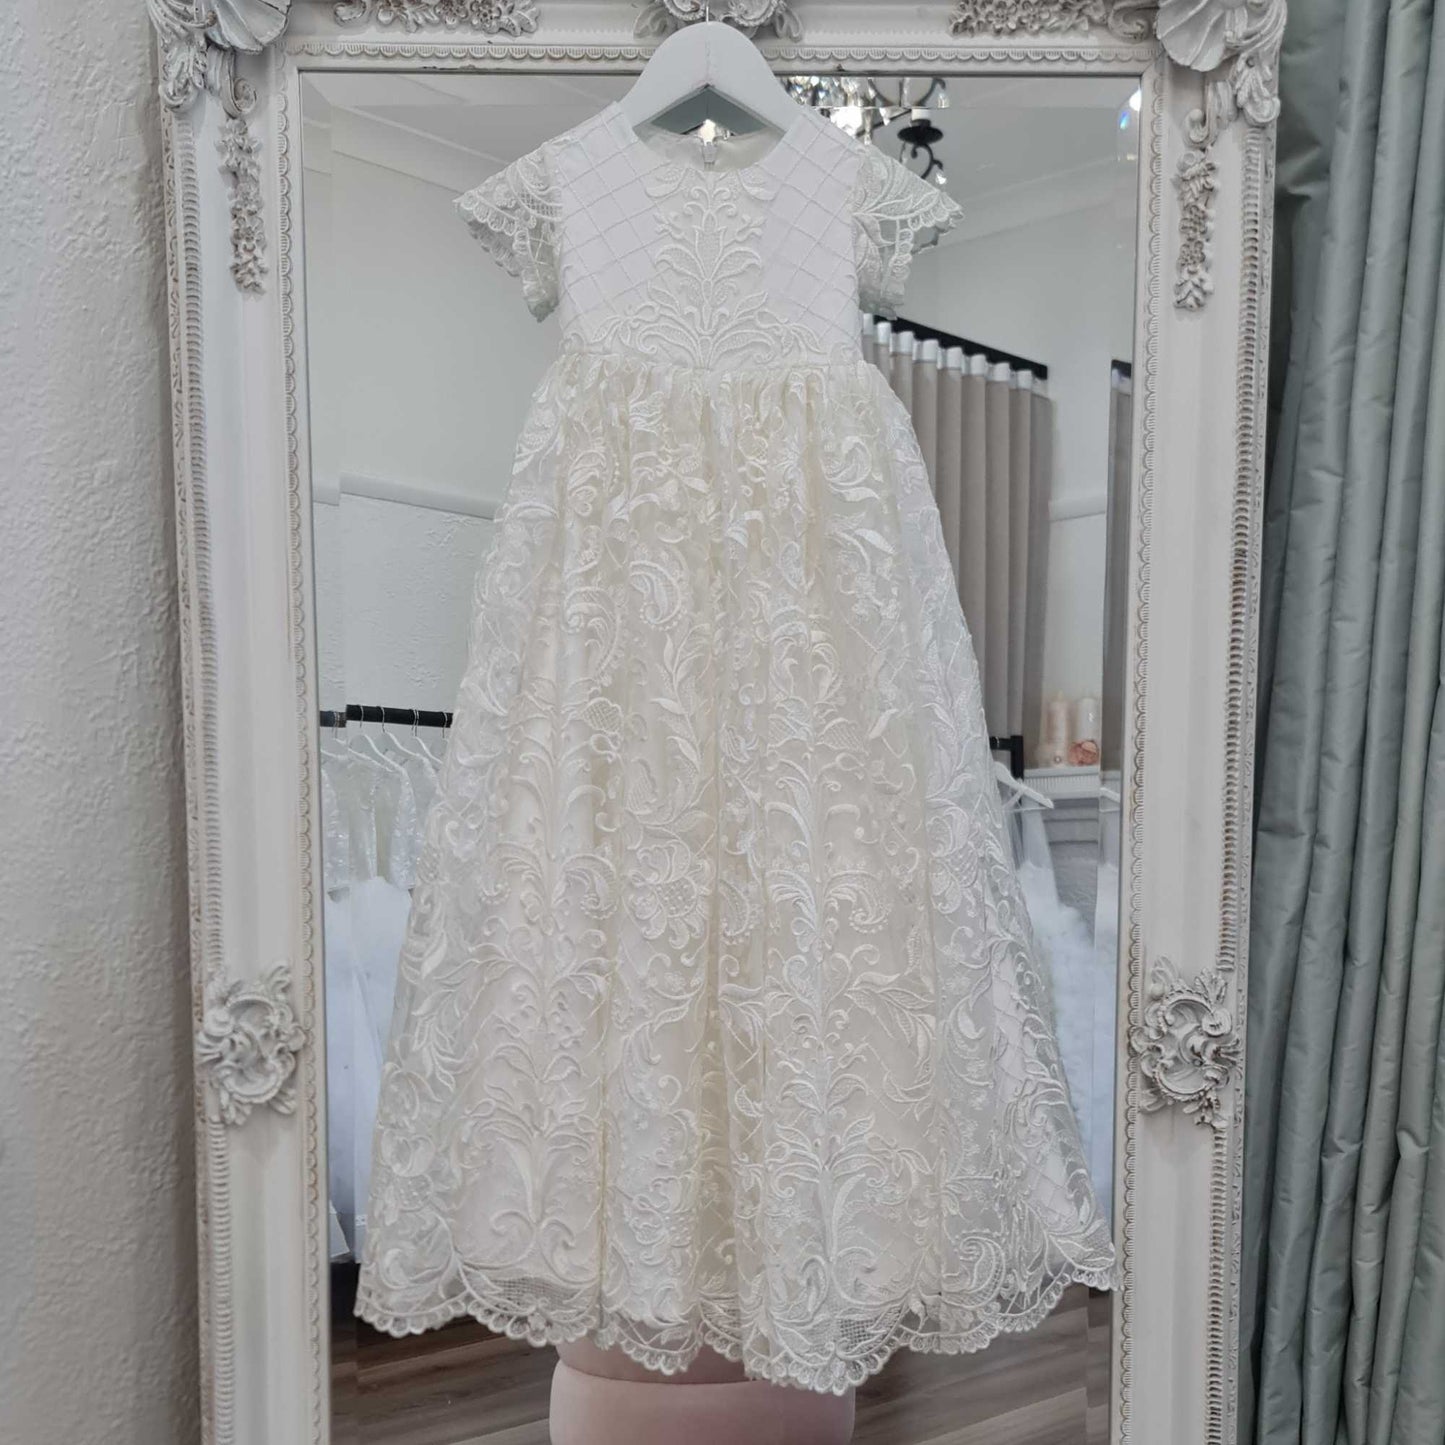 Baptism dress in ivory lace